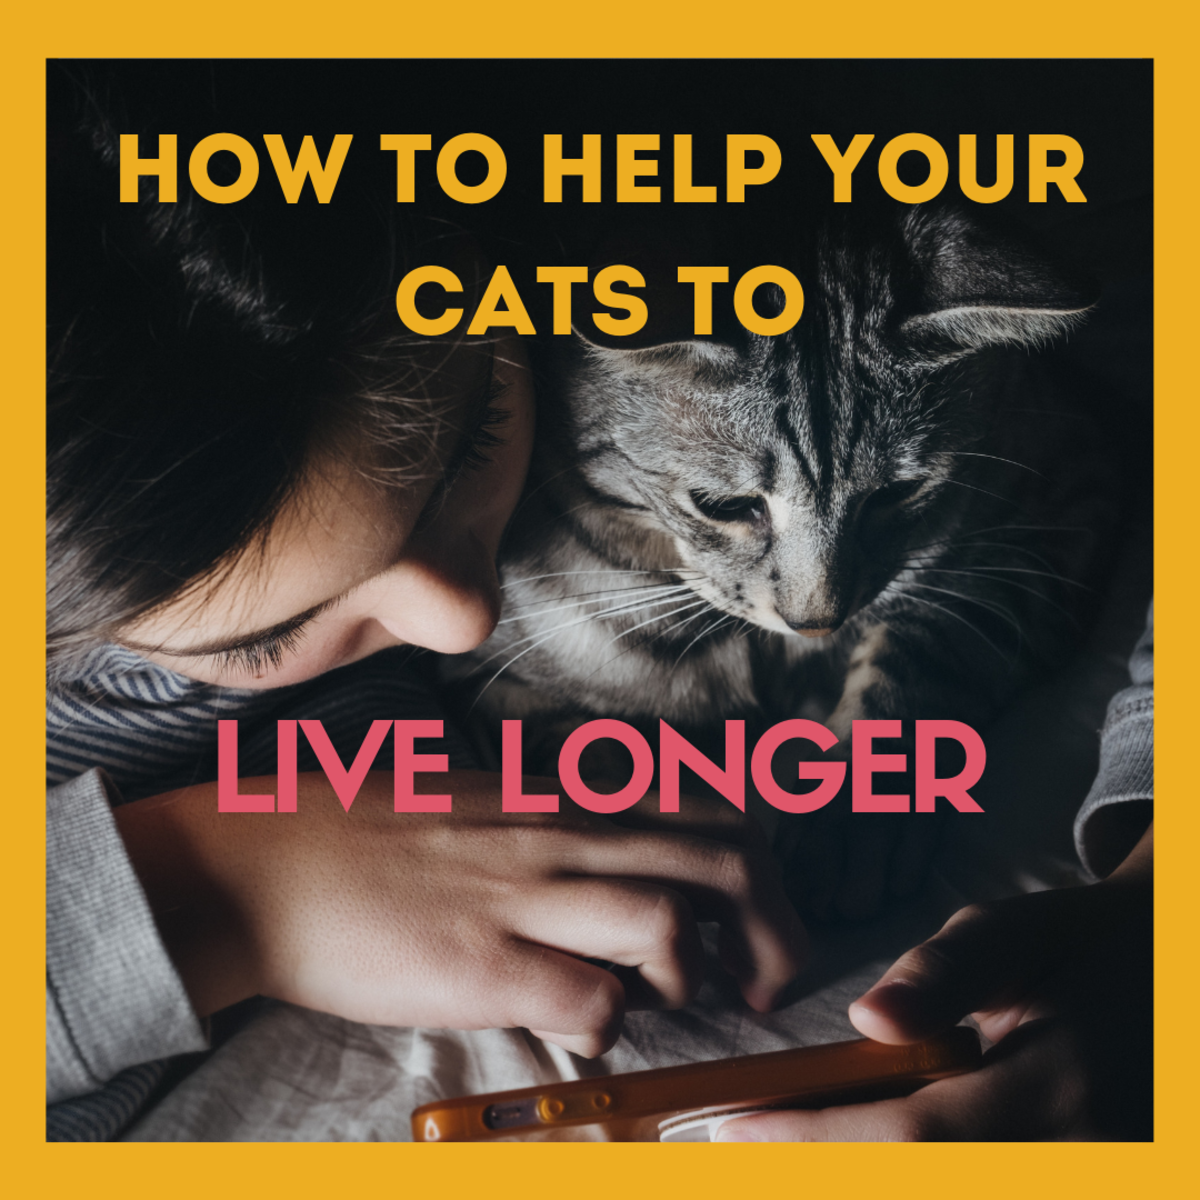 Tips on How to Extend Your Cat's Life